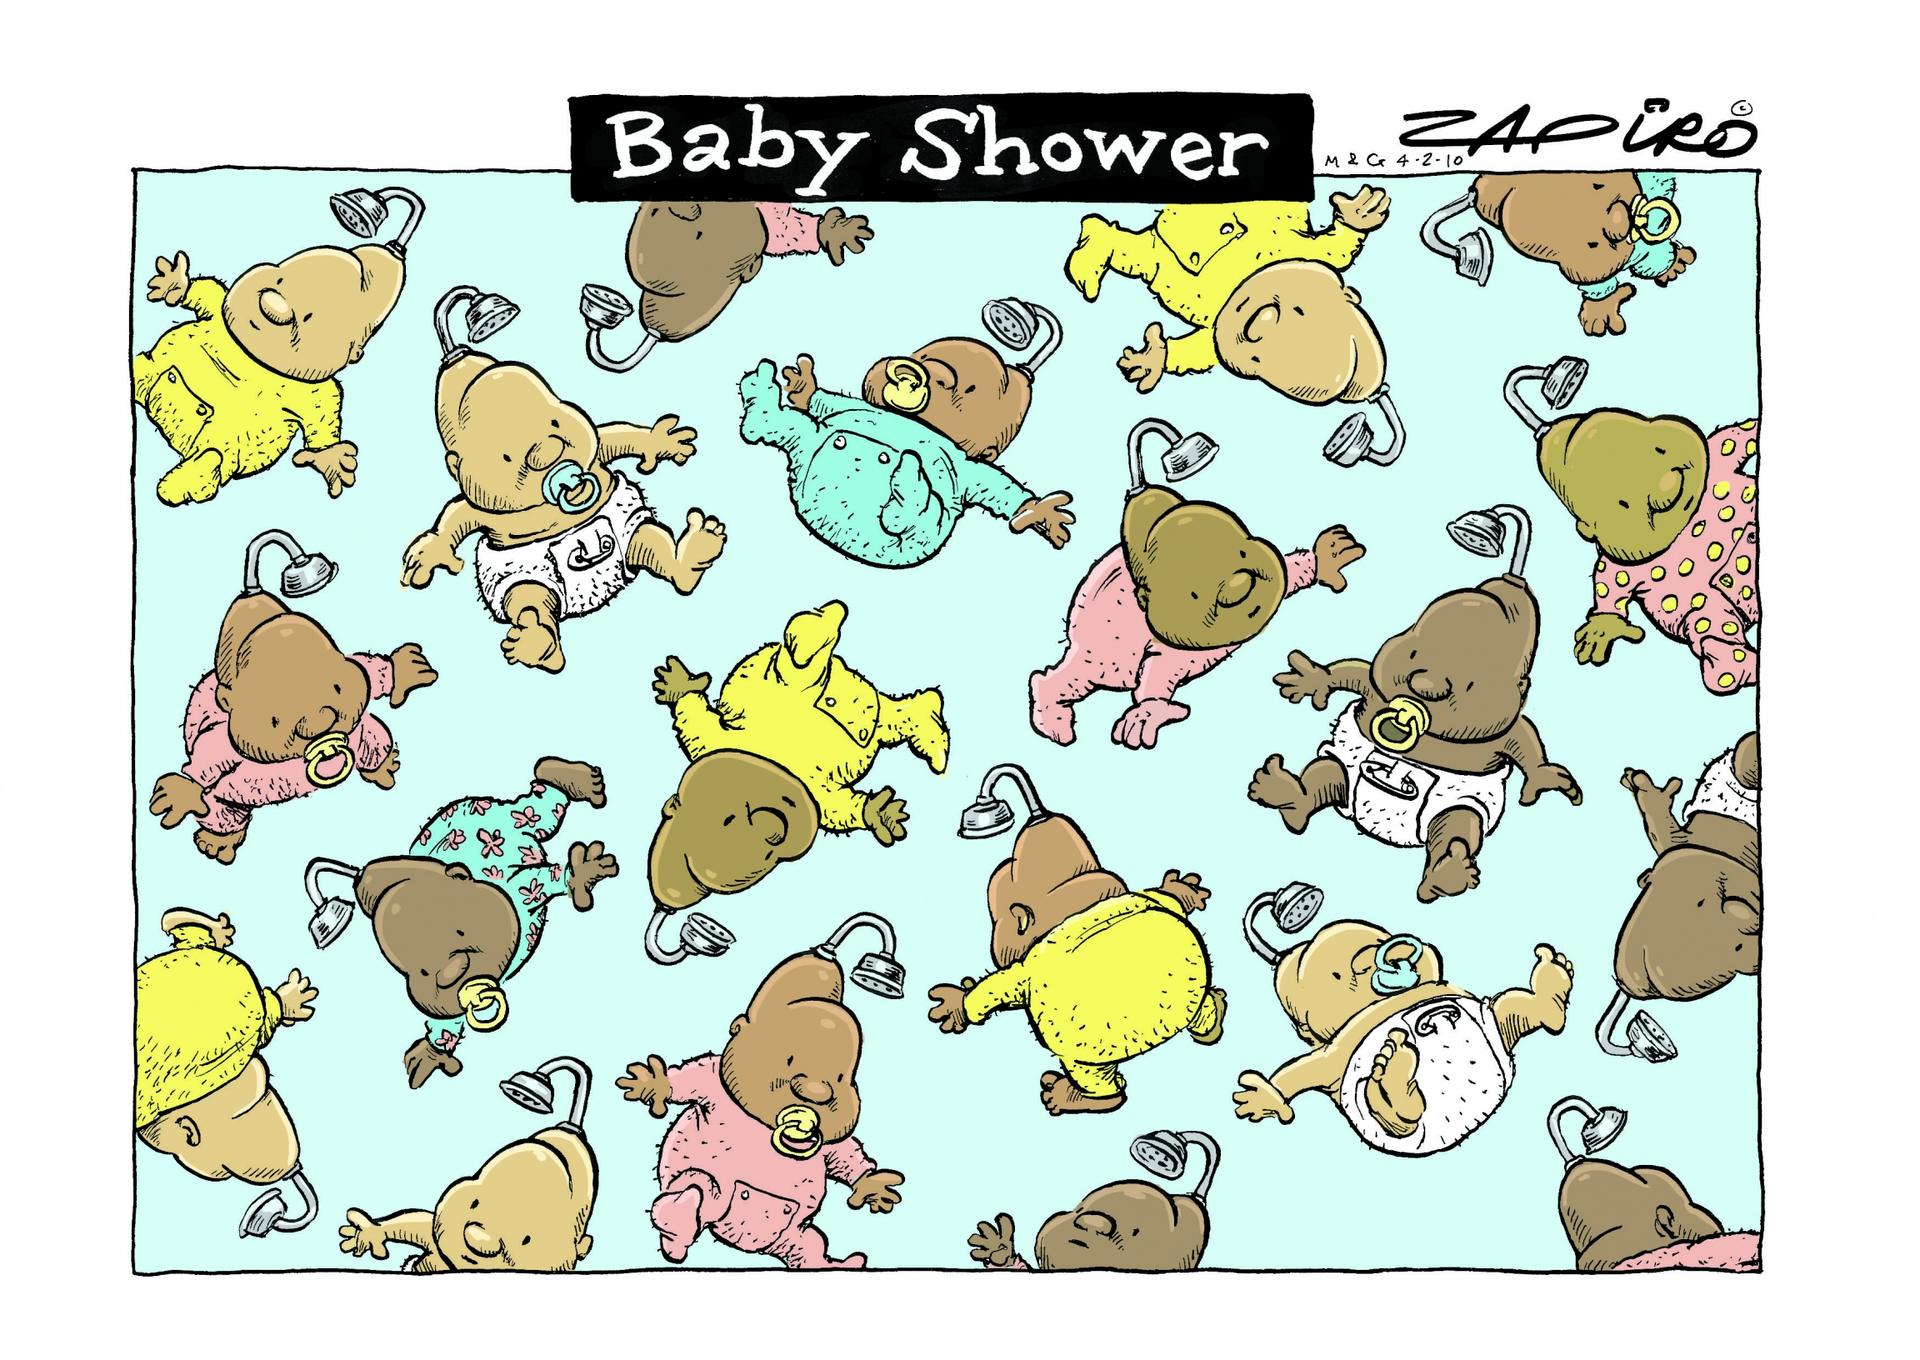 Zapiro cartoon called Baby Shower shows lots and lots of babies (Zuma's children) all with showers on their head